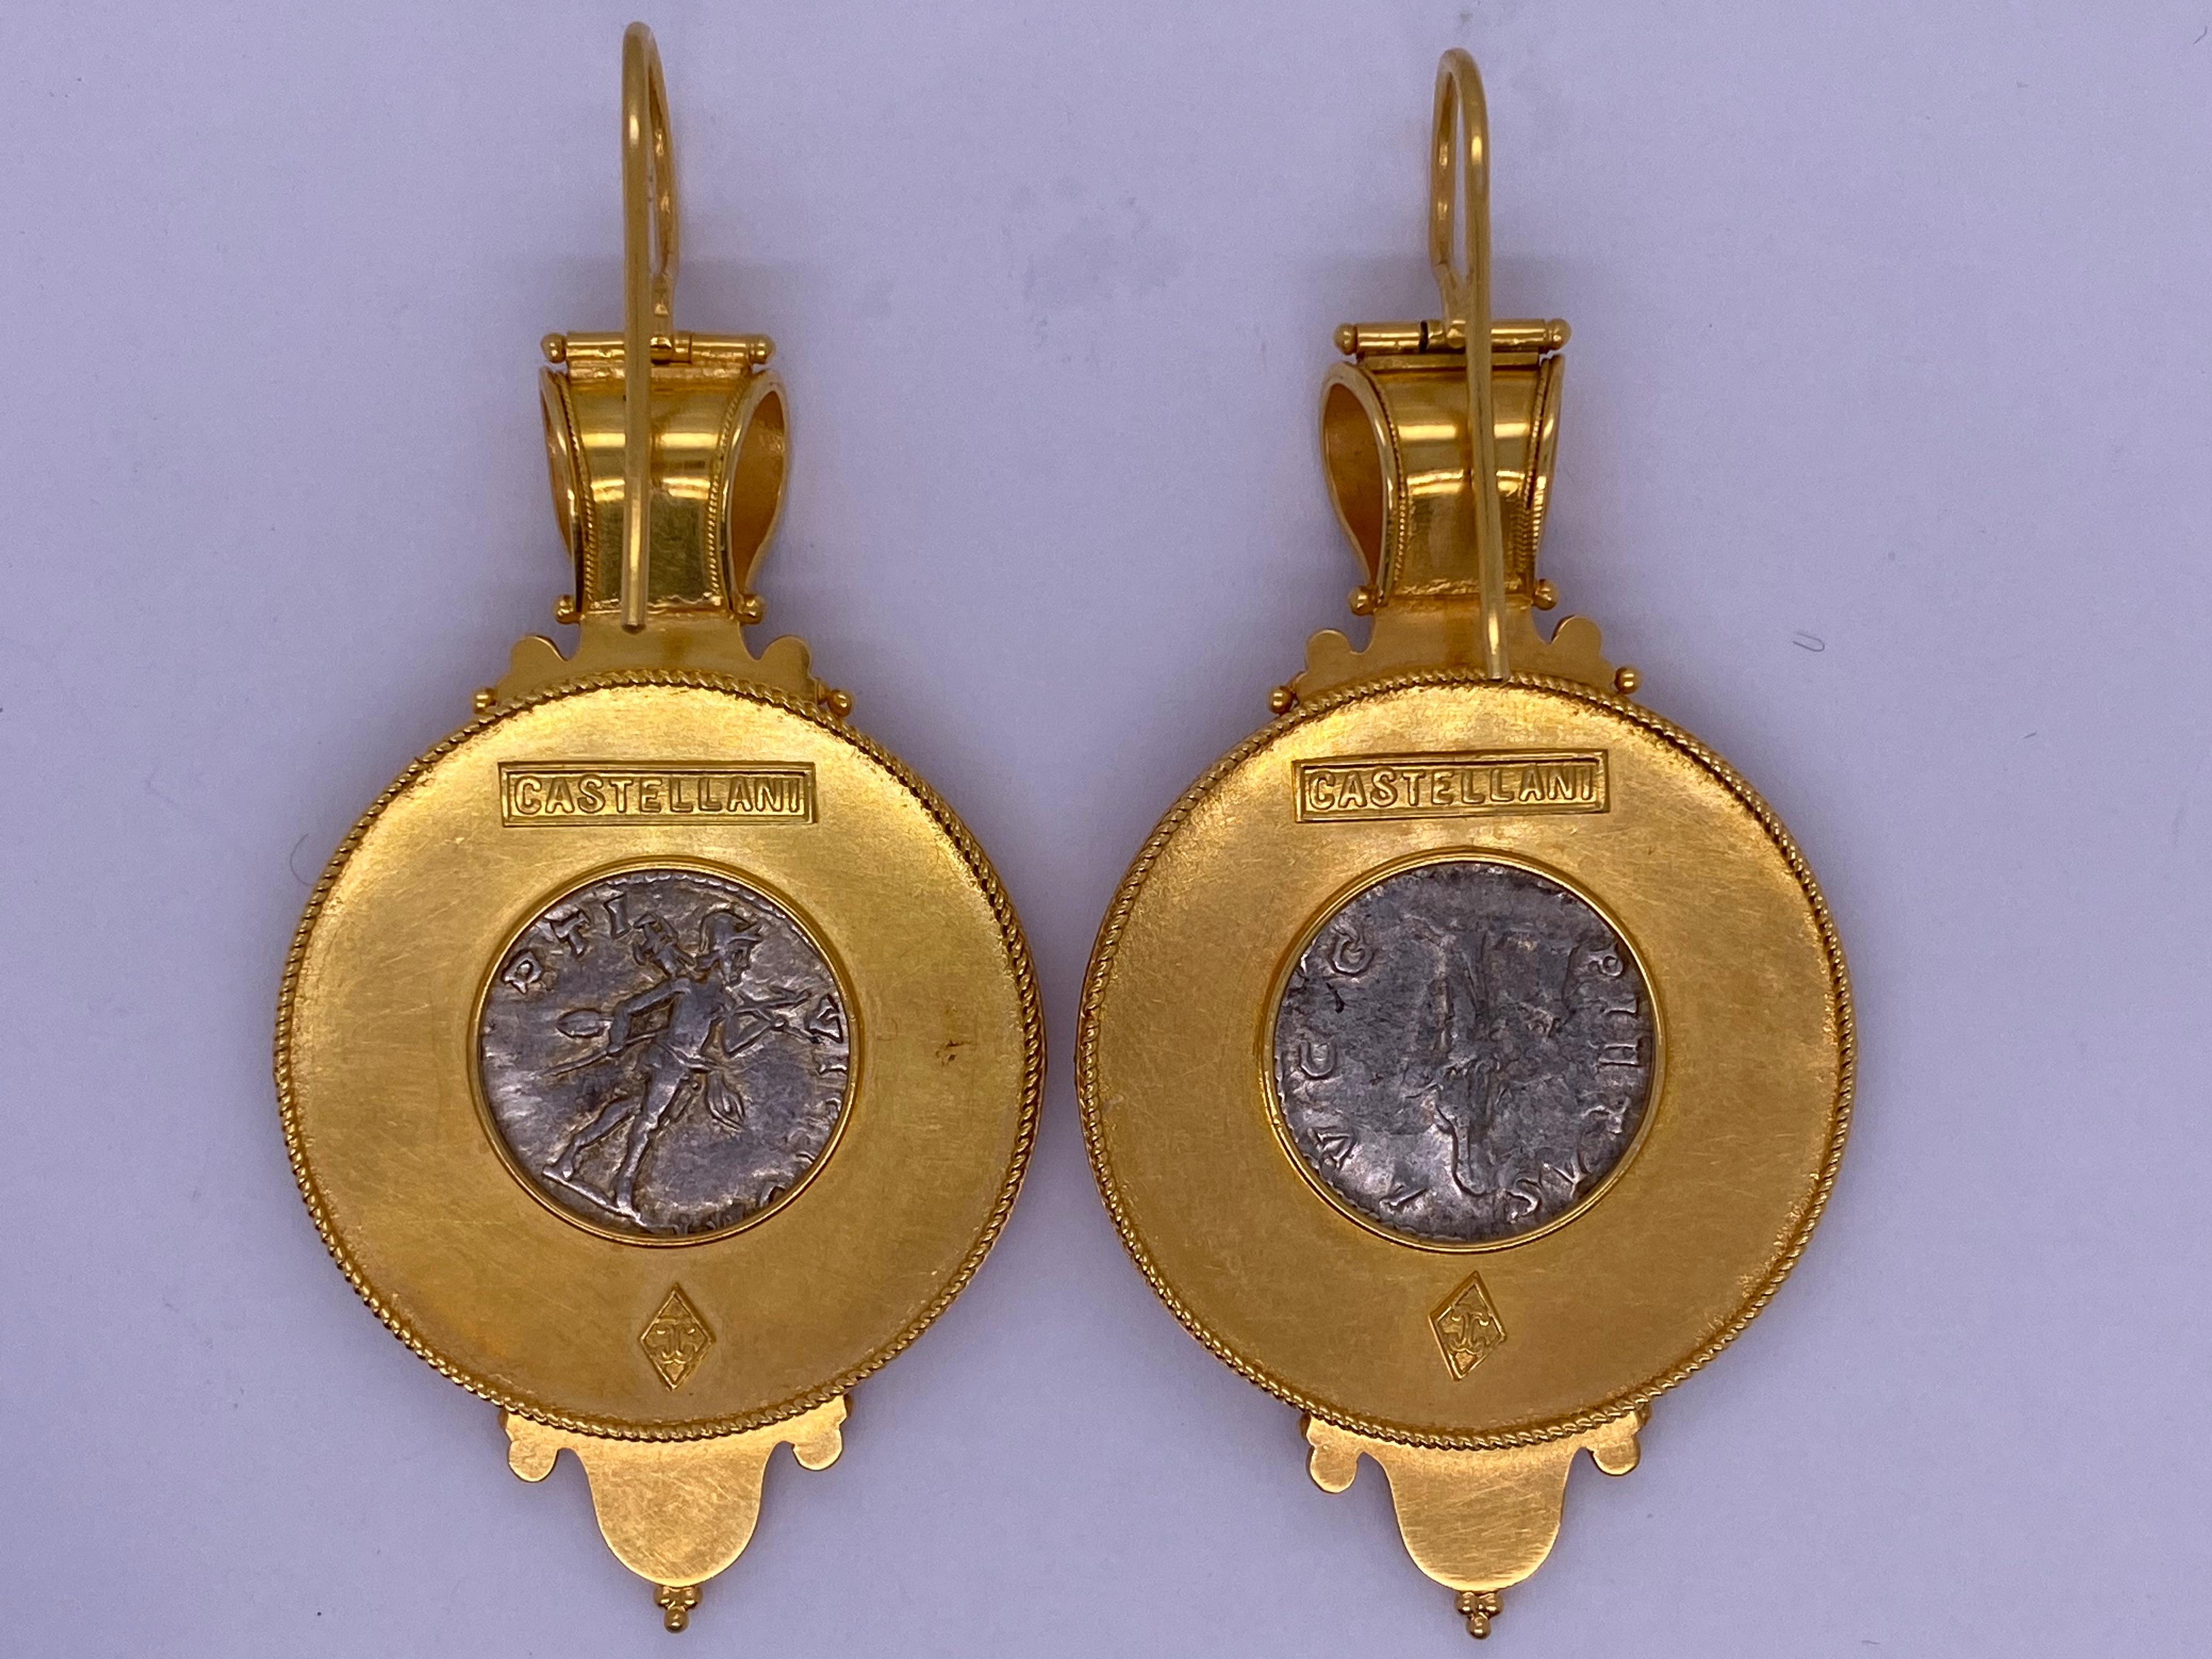 Castellani Ancient Silver Greek Coins circa 300BCE 15kt Gold Bulla Earrings  For Sale 6